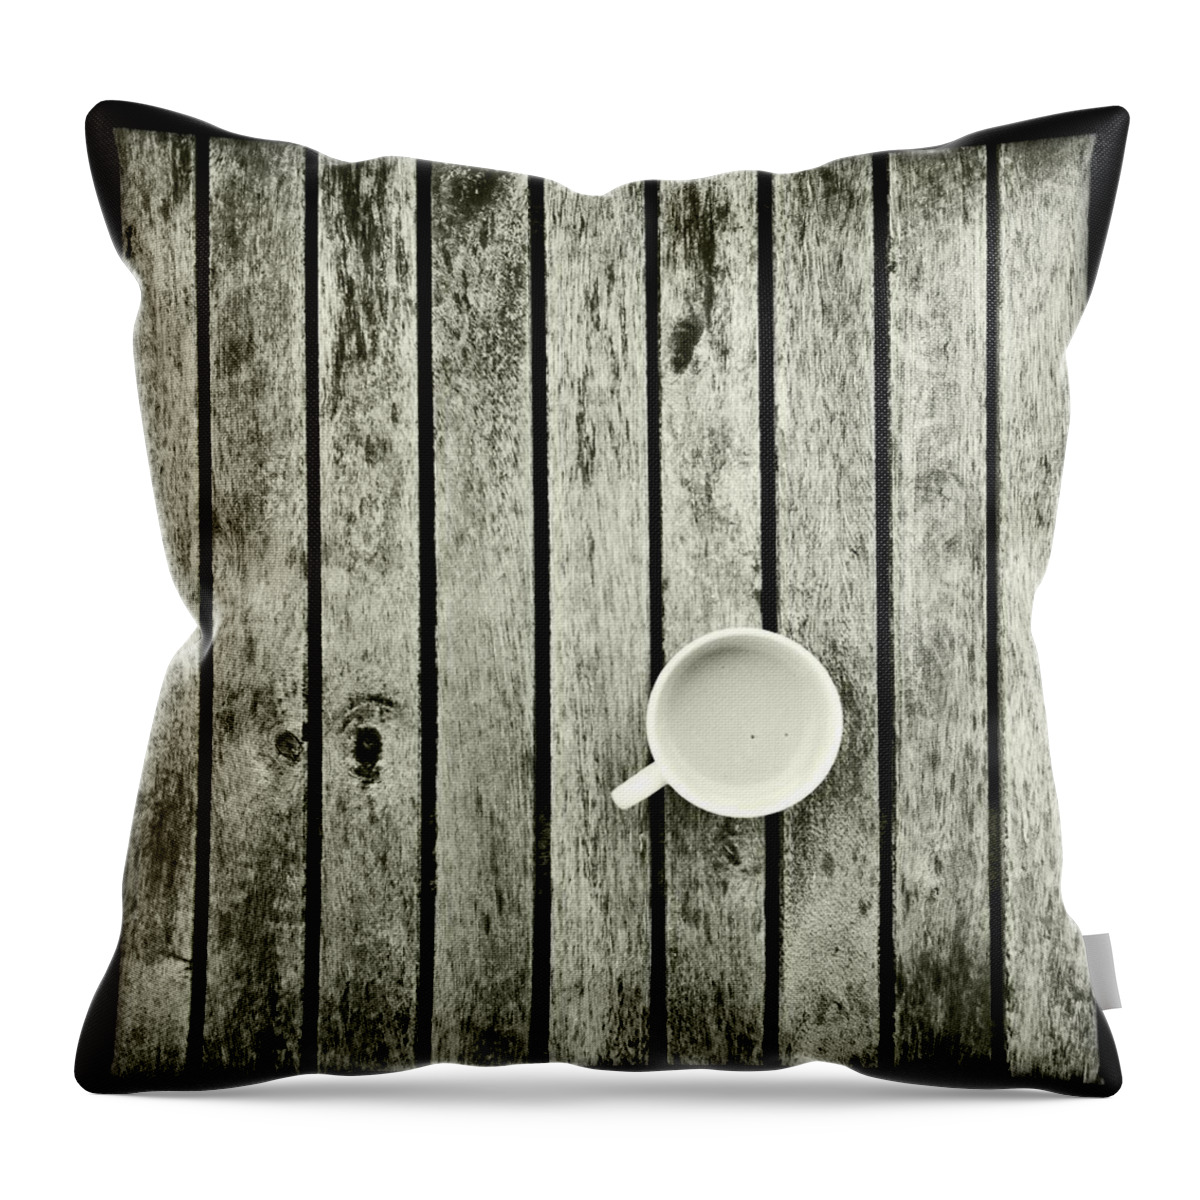 Espresso Throw Pillow featuring the photograph Espresso On A Wooden Table by Marco Oliveira